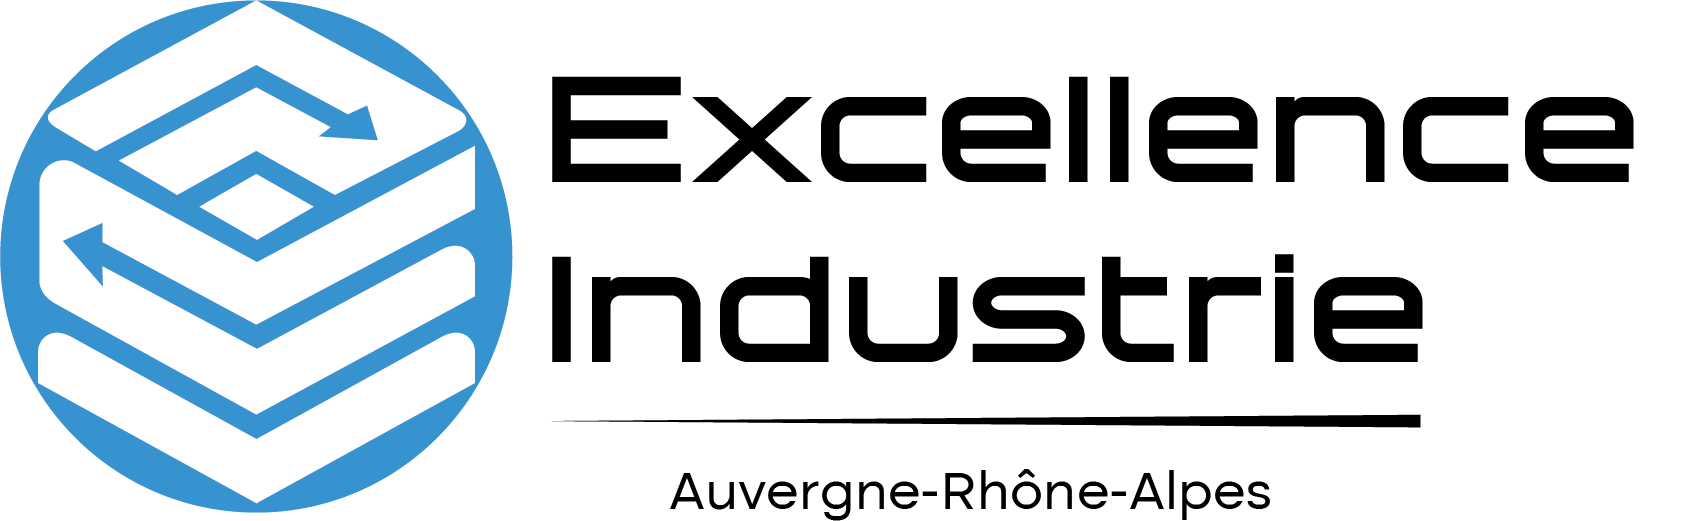 Logo-Excellence-Industrie